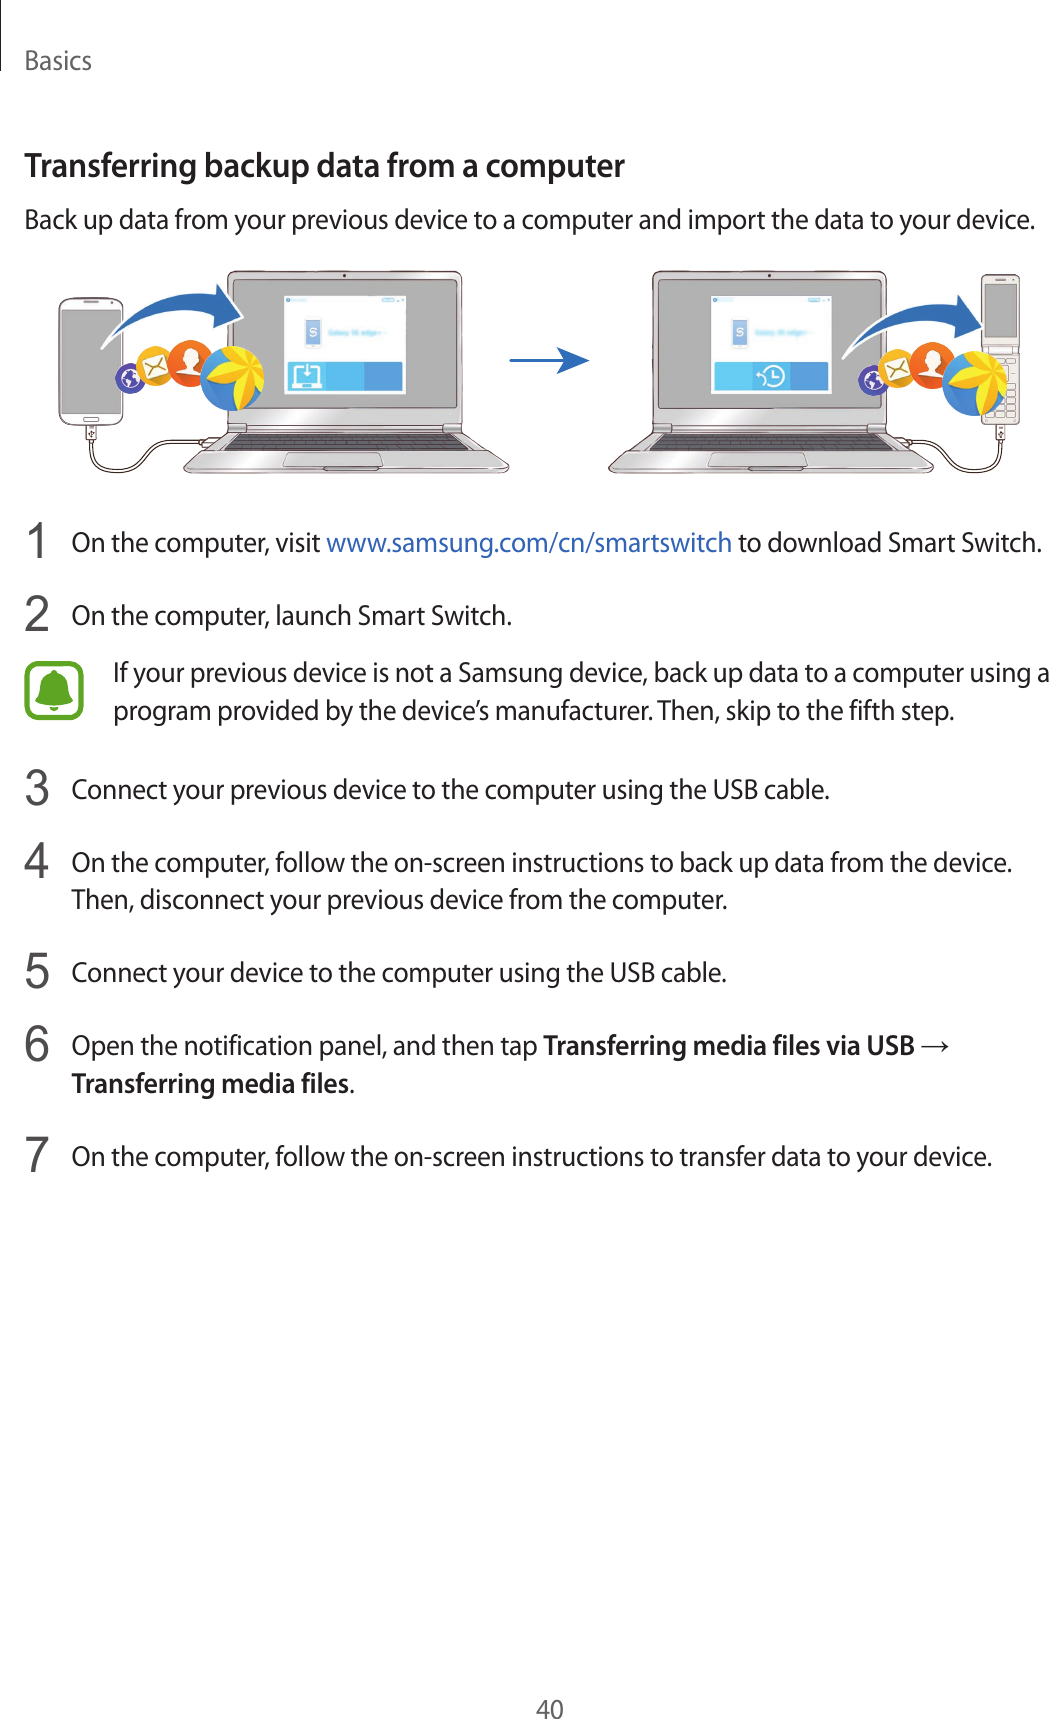 Basics40Transferring backup data from a computerBack up data from your previous device to a computer and import the data to your device.1  On the computer, visit www.samsung.com/cn/smartswitch to download Smart Switch.2  On the computer, launch Smart Switch.If your previous device is not a Samsung device, back up data to a computer using a program provided by the device’s manufacturer. Then, skip to the fifth step.3  Connect your previous device to the computer using the USB cable.4  On the computer, follow the on-screen instructions to back up data from the device. Then, disconnect your previous device from the computer.5  Connect your device to the computer using the USB cable.6  Open the notification panel, and then tap Transferring media files via USB → Transferring media files.7  On the computer, follow the on-screen instructions to transfer data to your device.